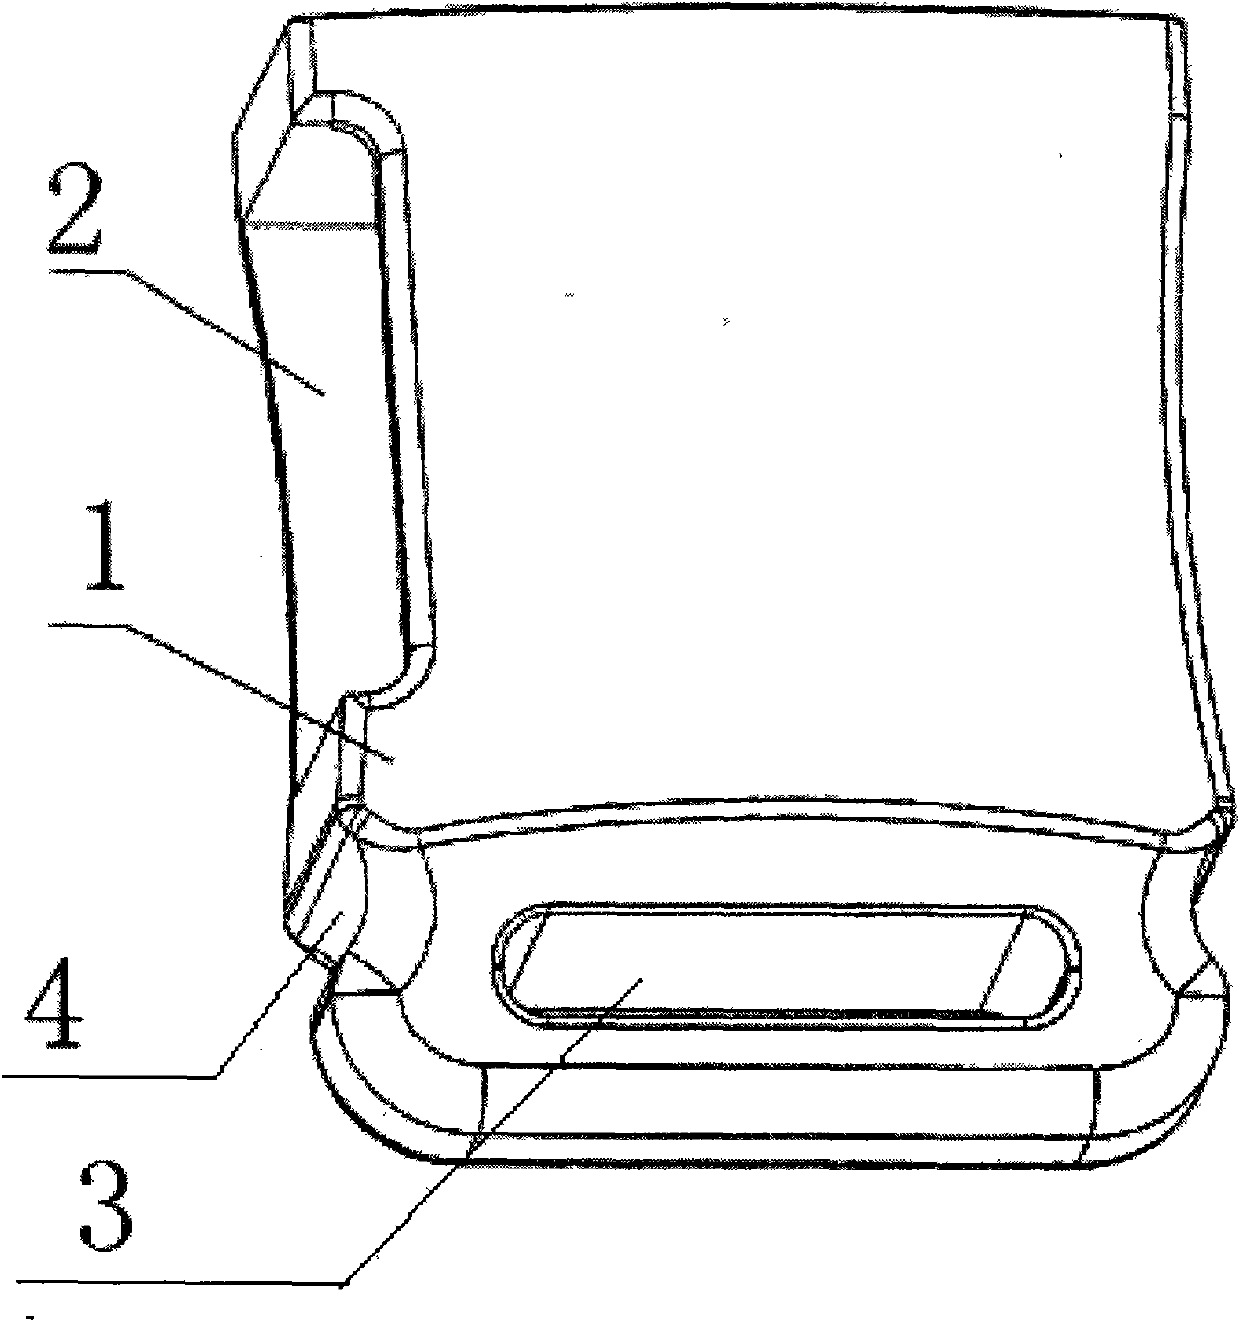 A shell structure of fastener used for safety seat of children